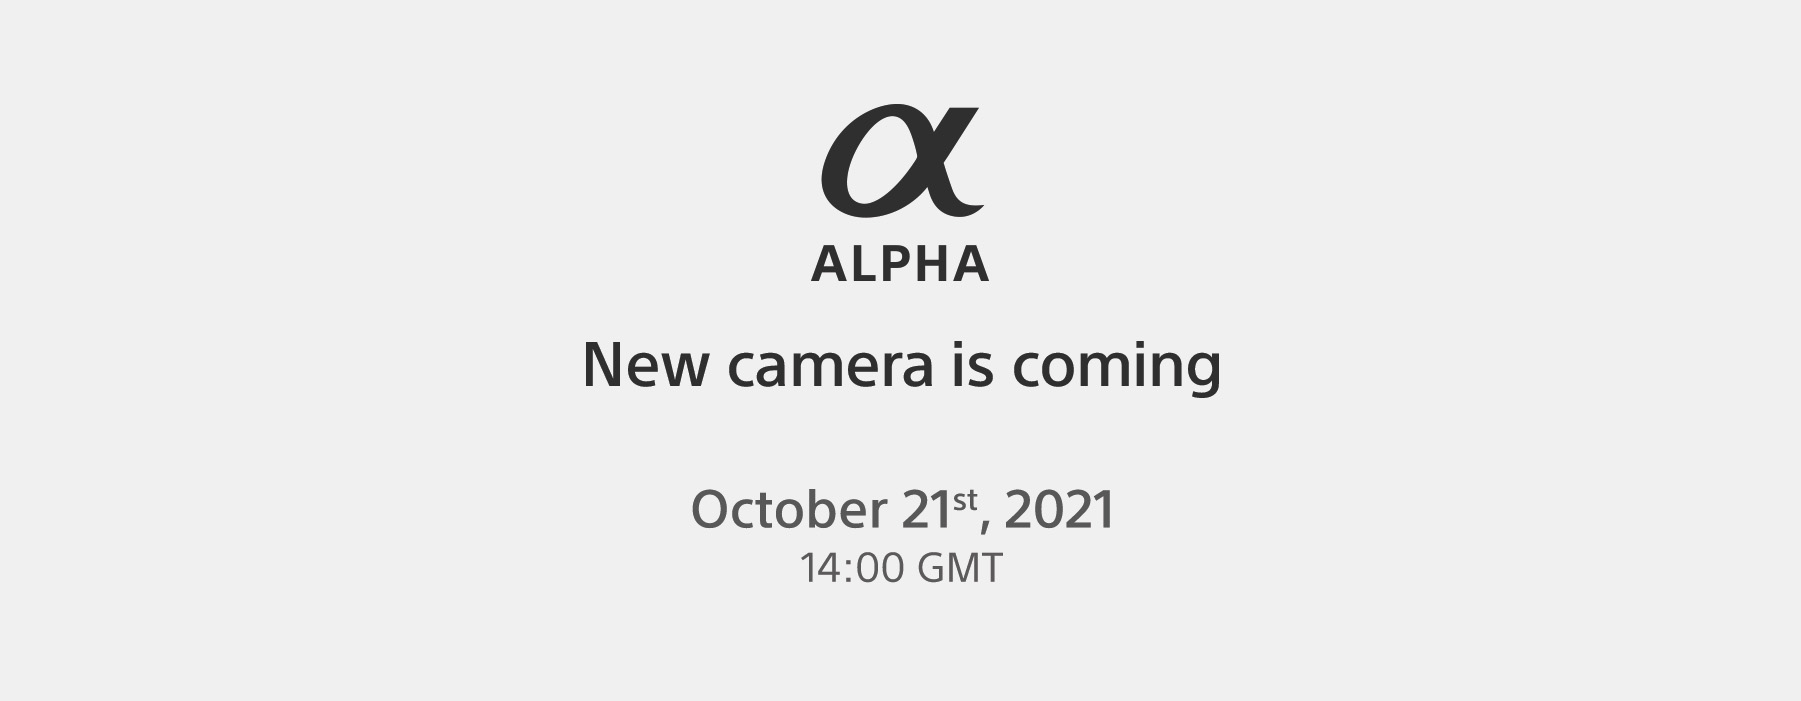 New camera is coming : English